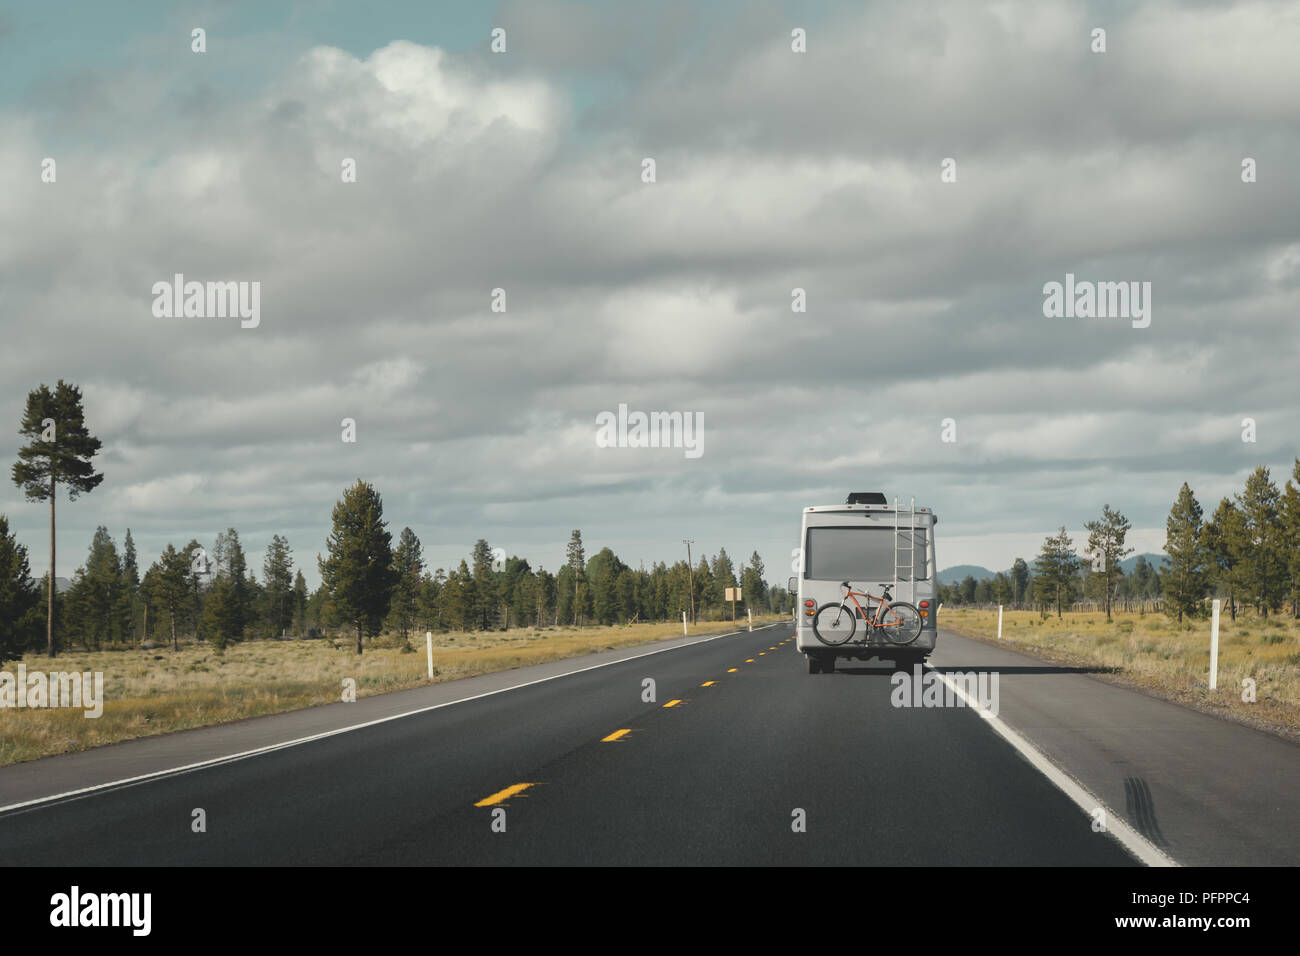 Travel van or RV car or recreatonal vehicle driving on US highway 97 in Oregon, USA. Copy space, travel, road trip, wanderlust concept. Stock Photo